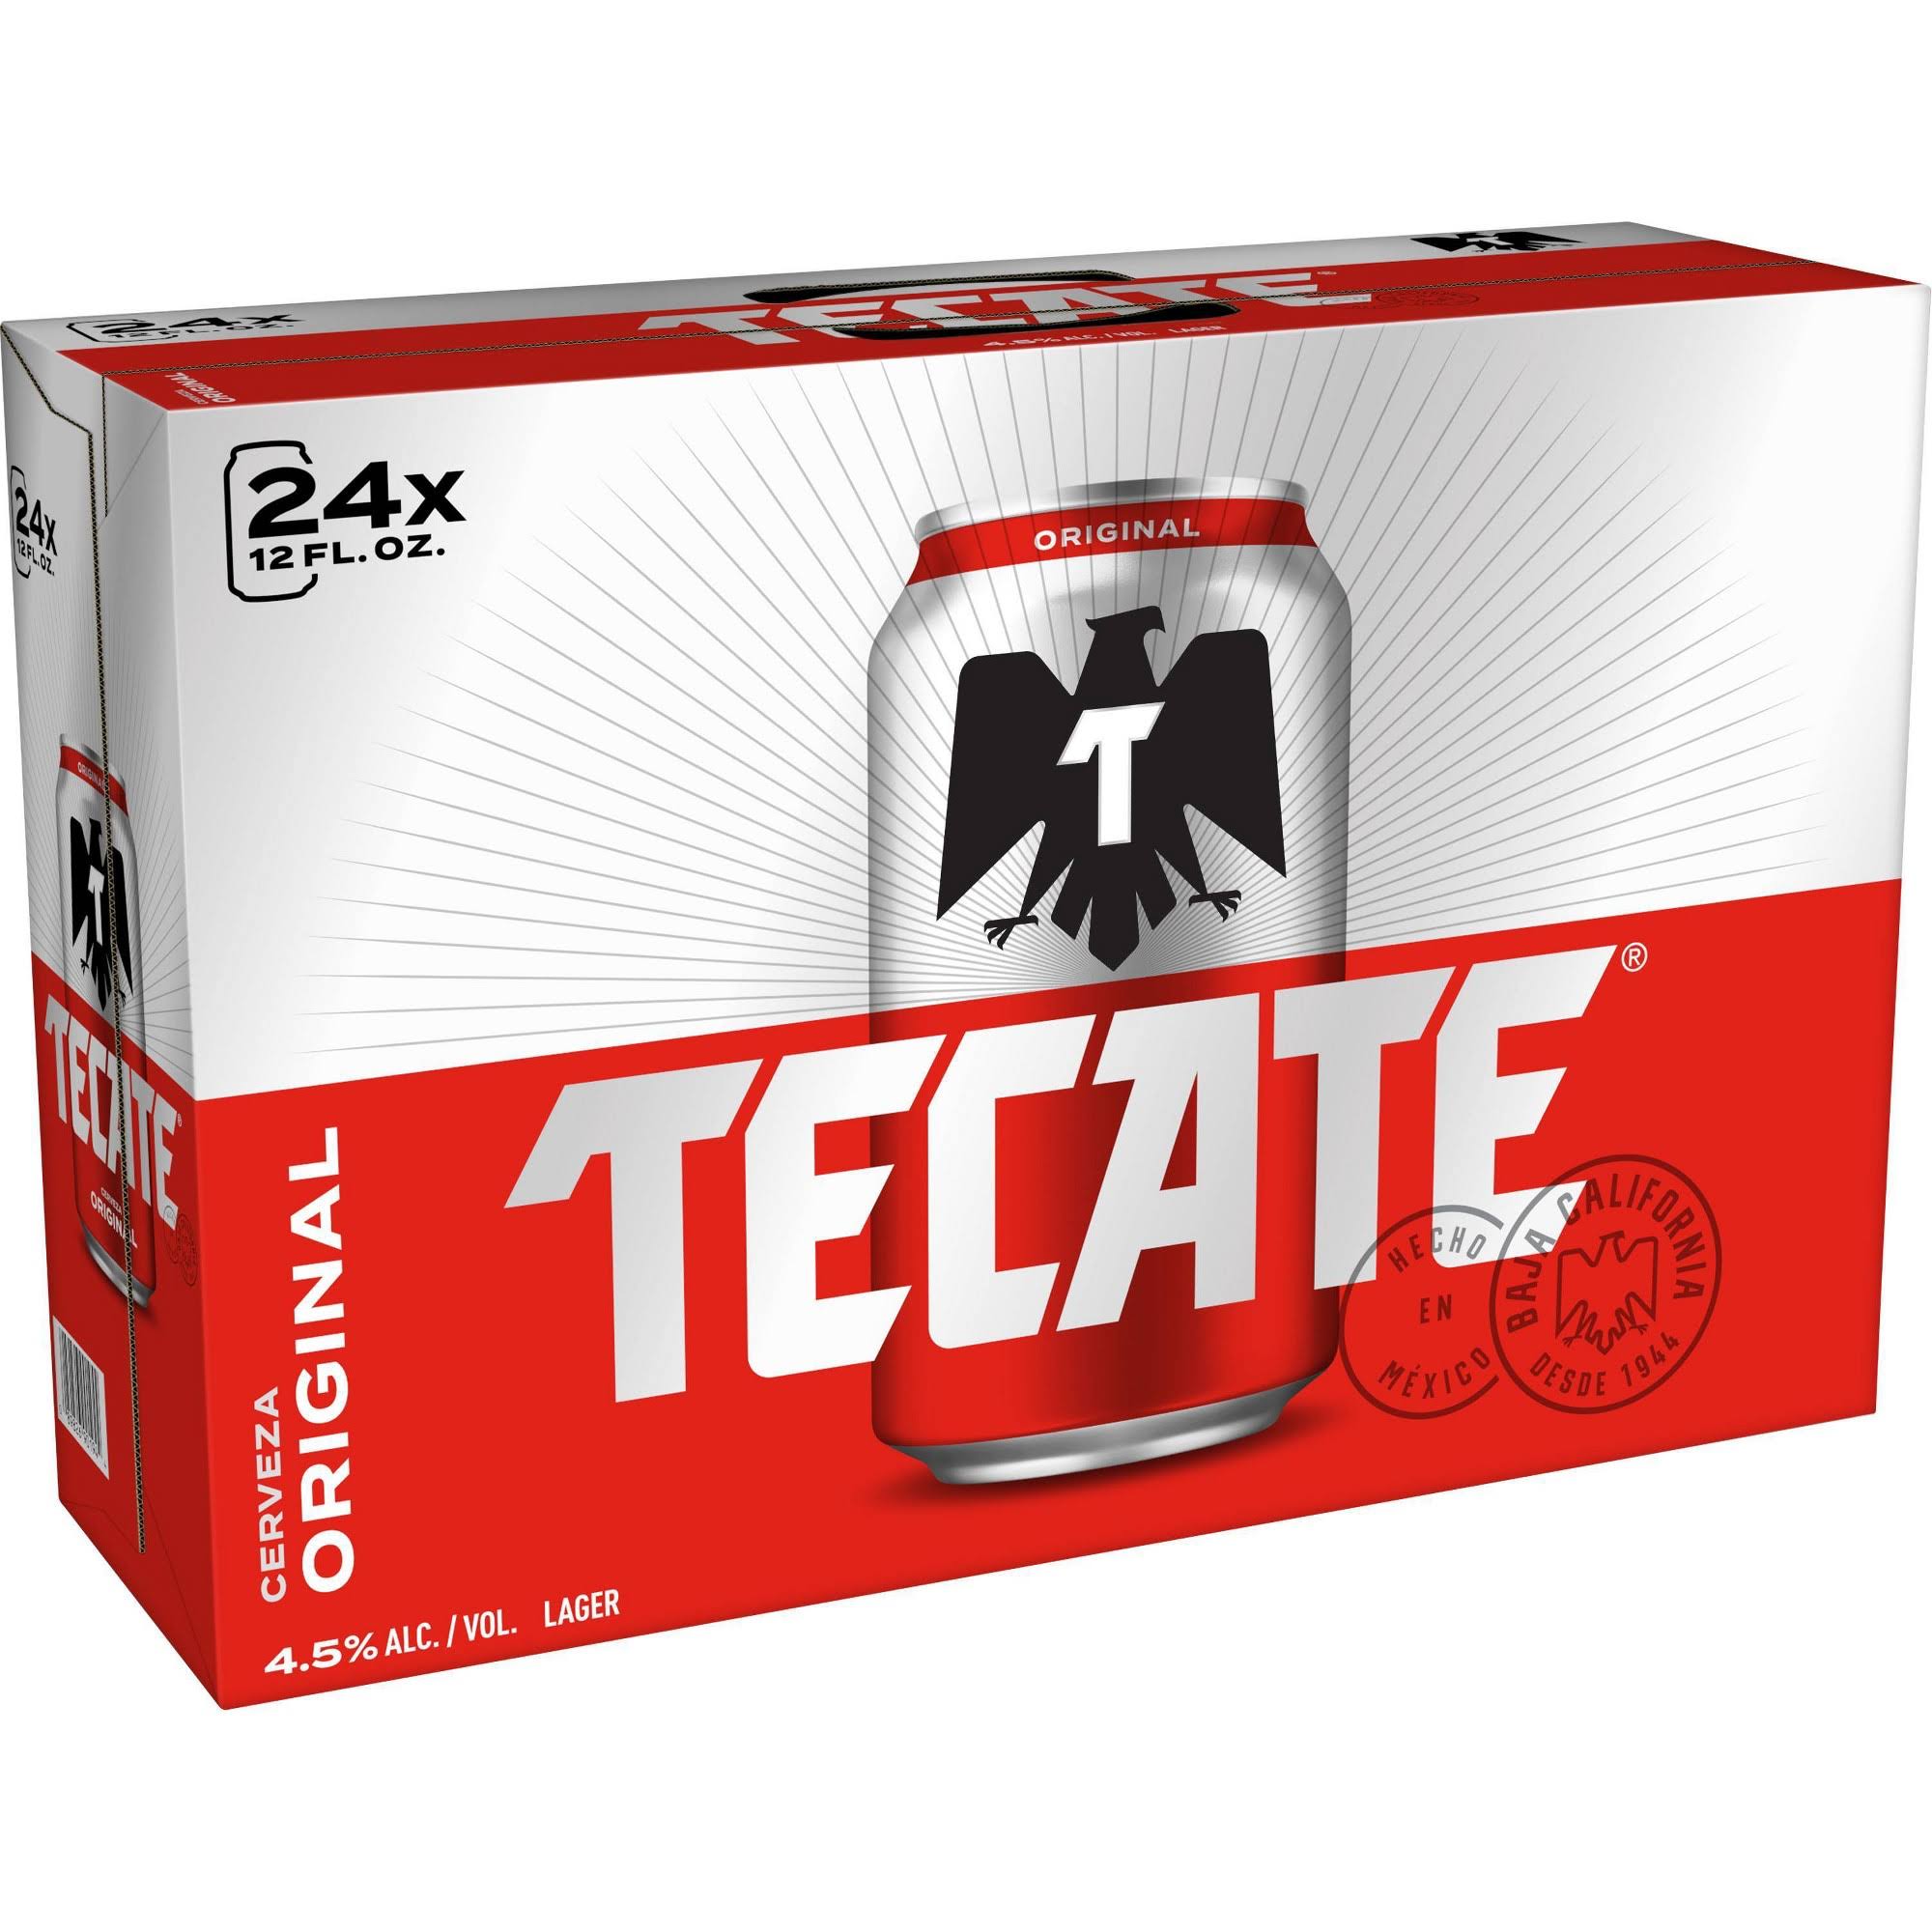 Tecate Mexican Beer - 24ct